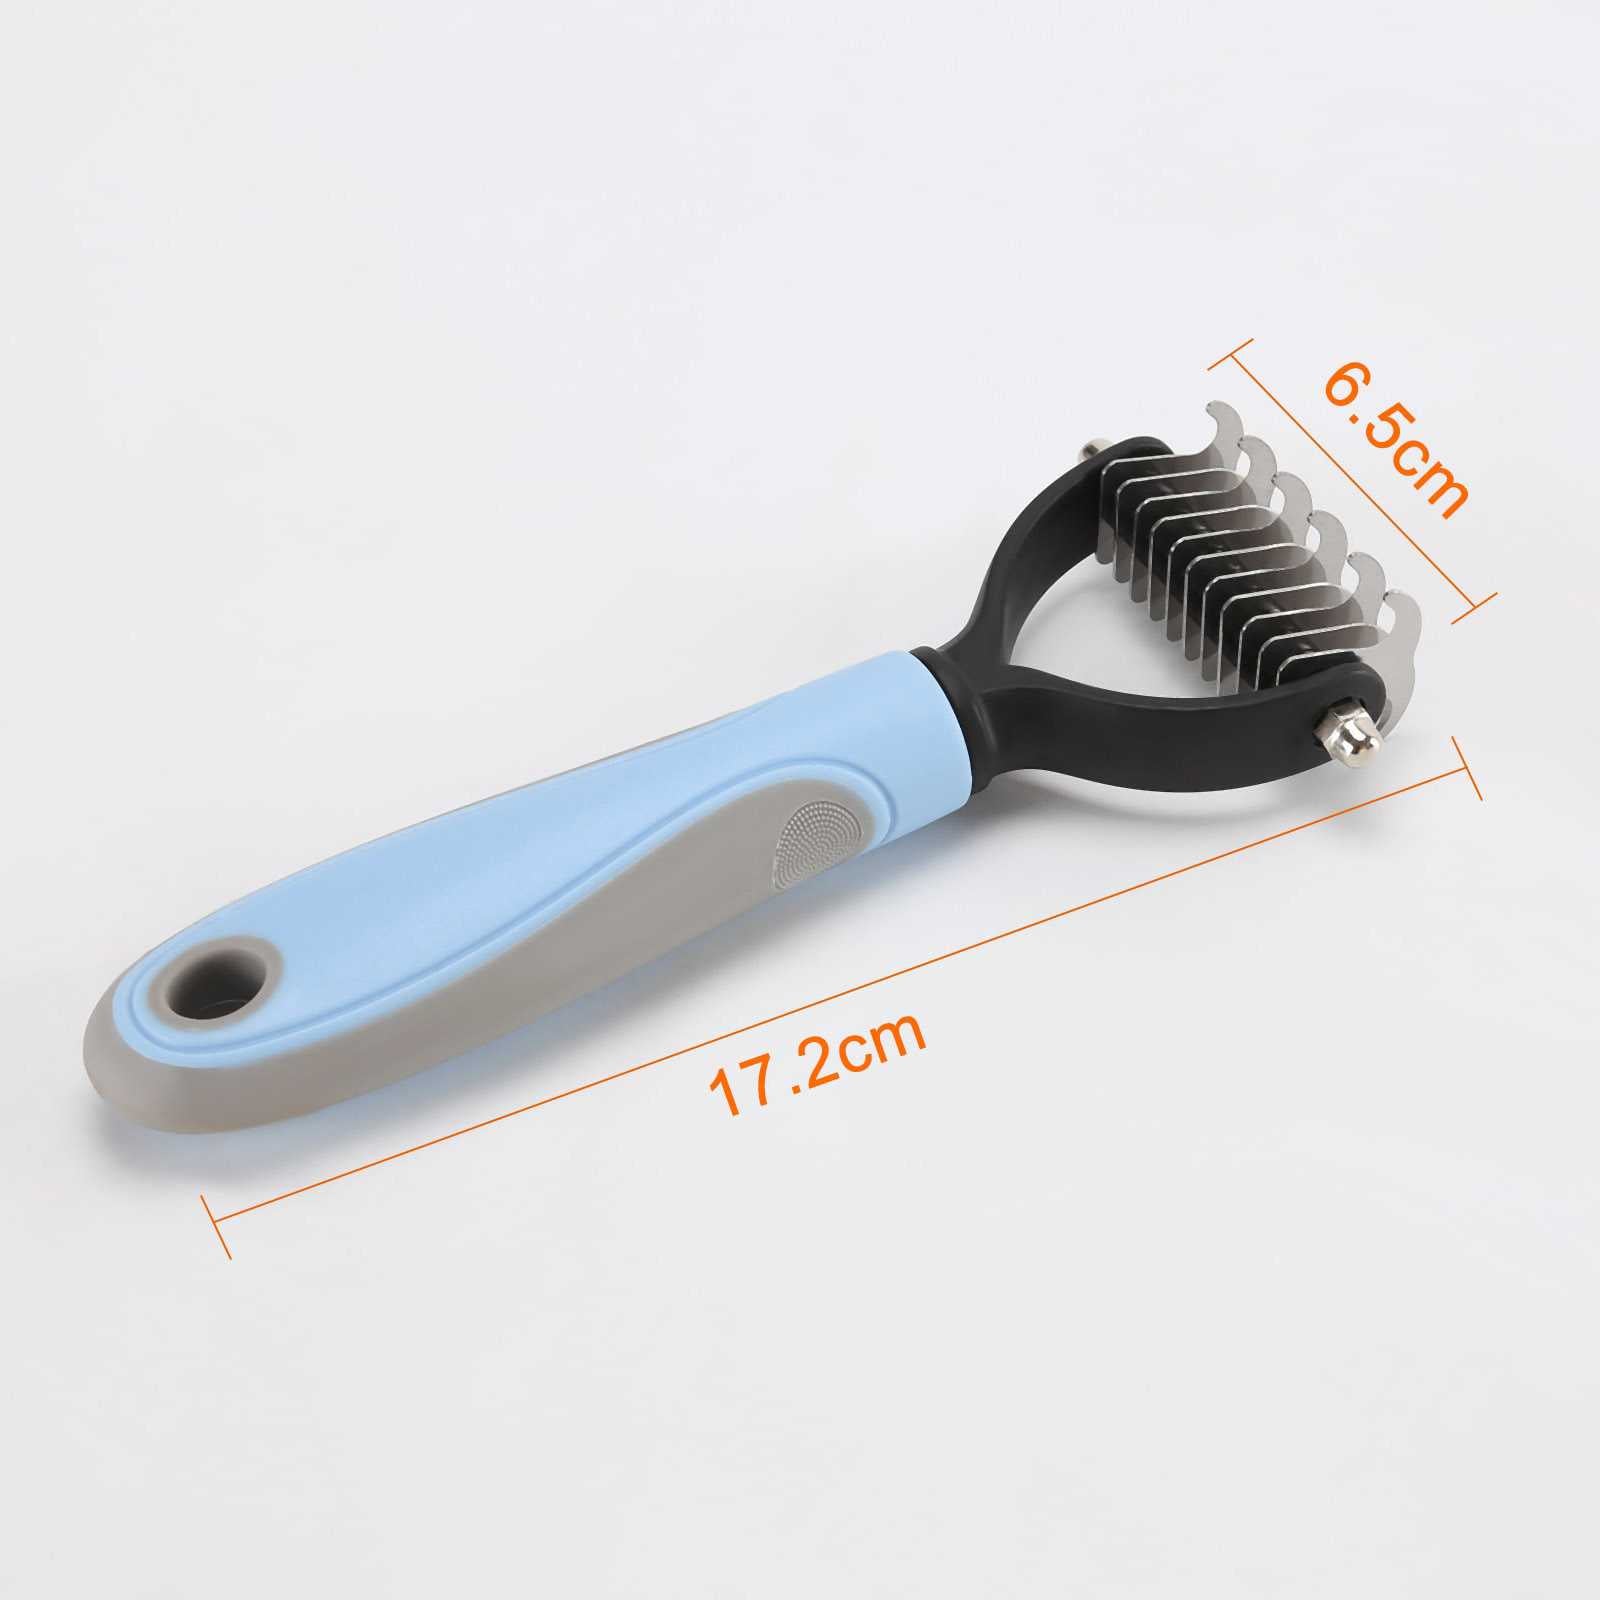 Dogs Cats Pet Hair Removal Comb Deshedding Brush Grooming Tool